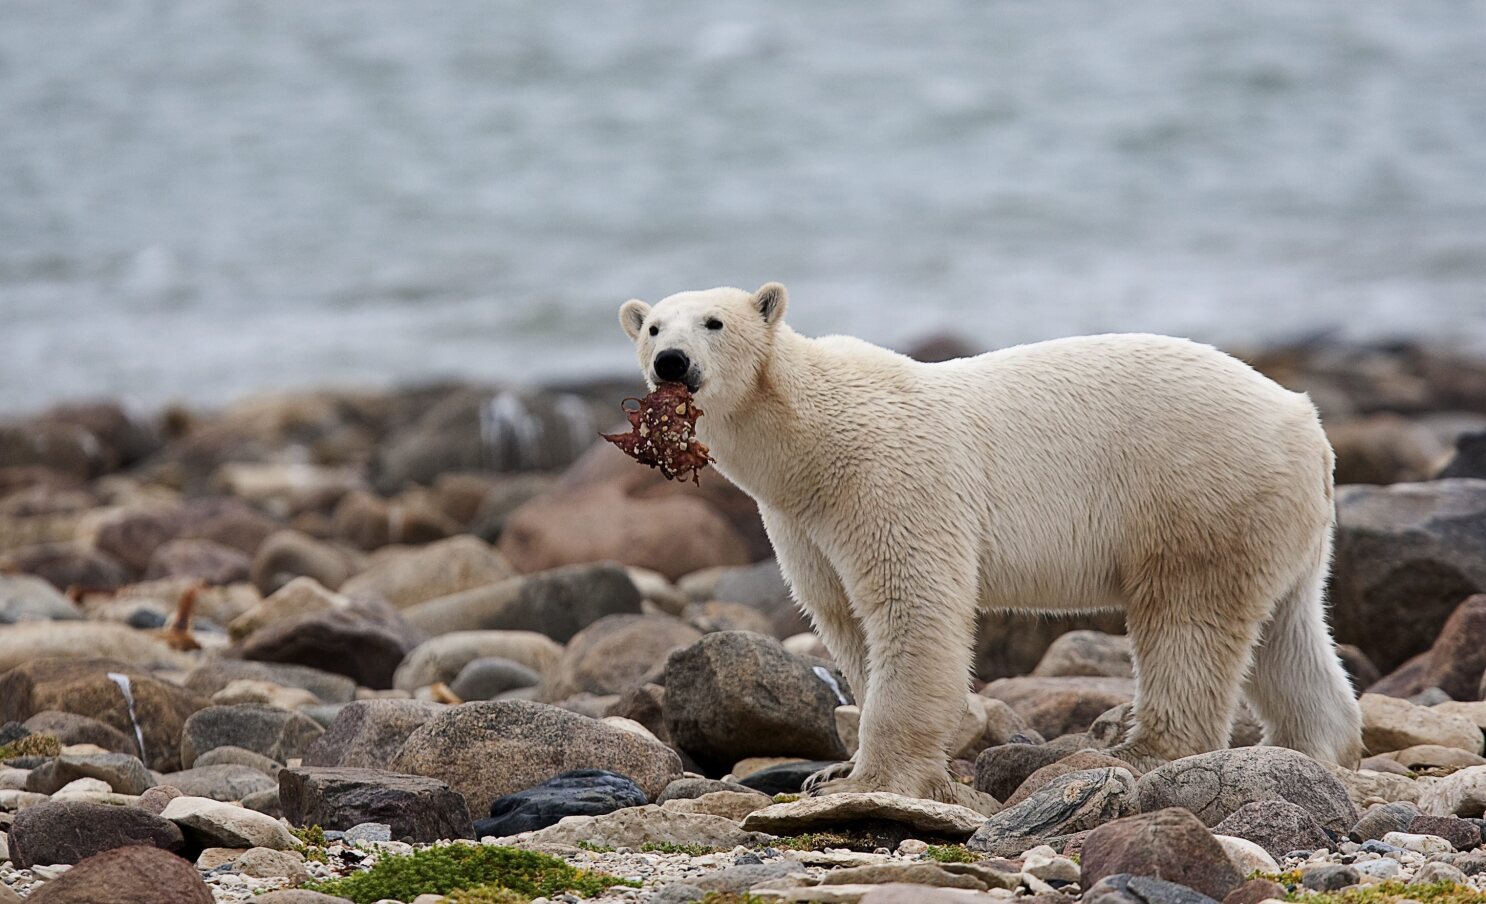 For threatened polar bears, the climate change diet is a losing proposition